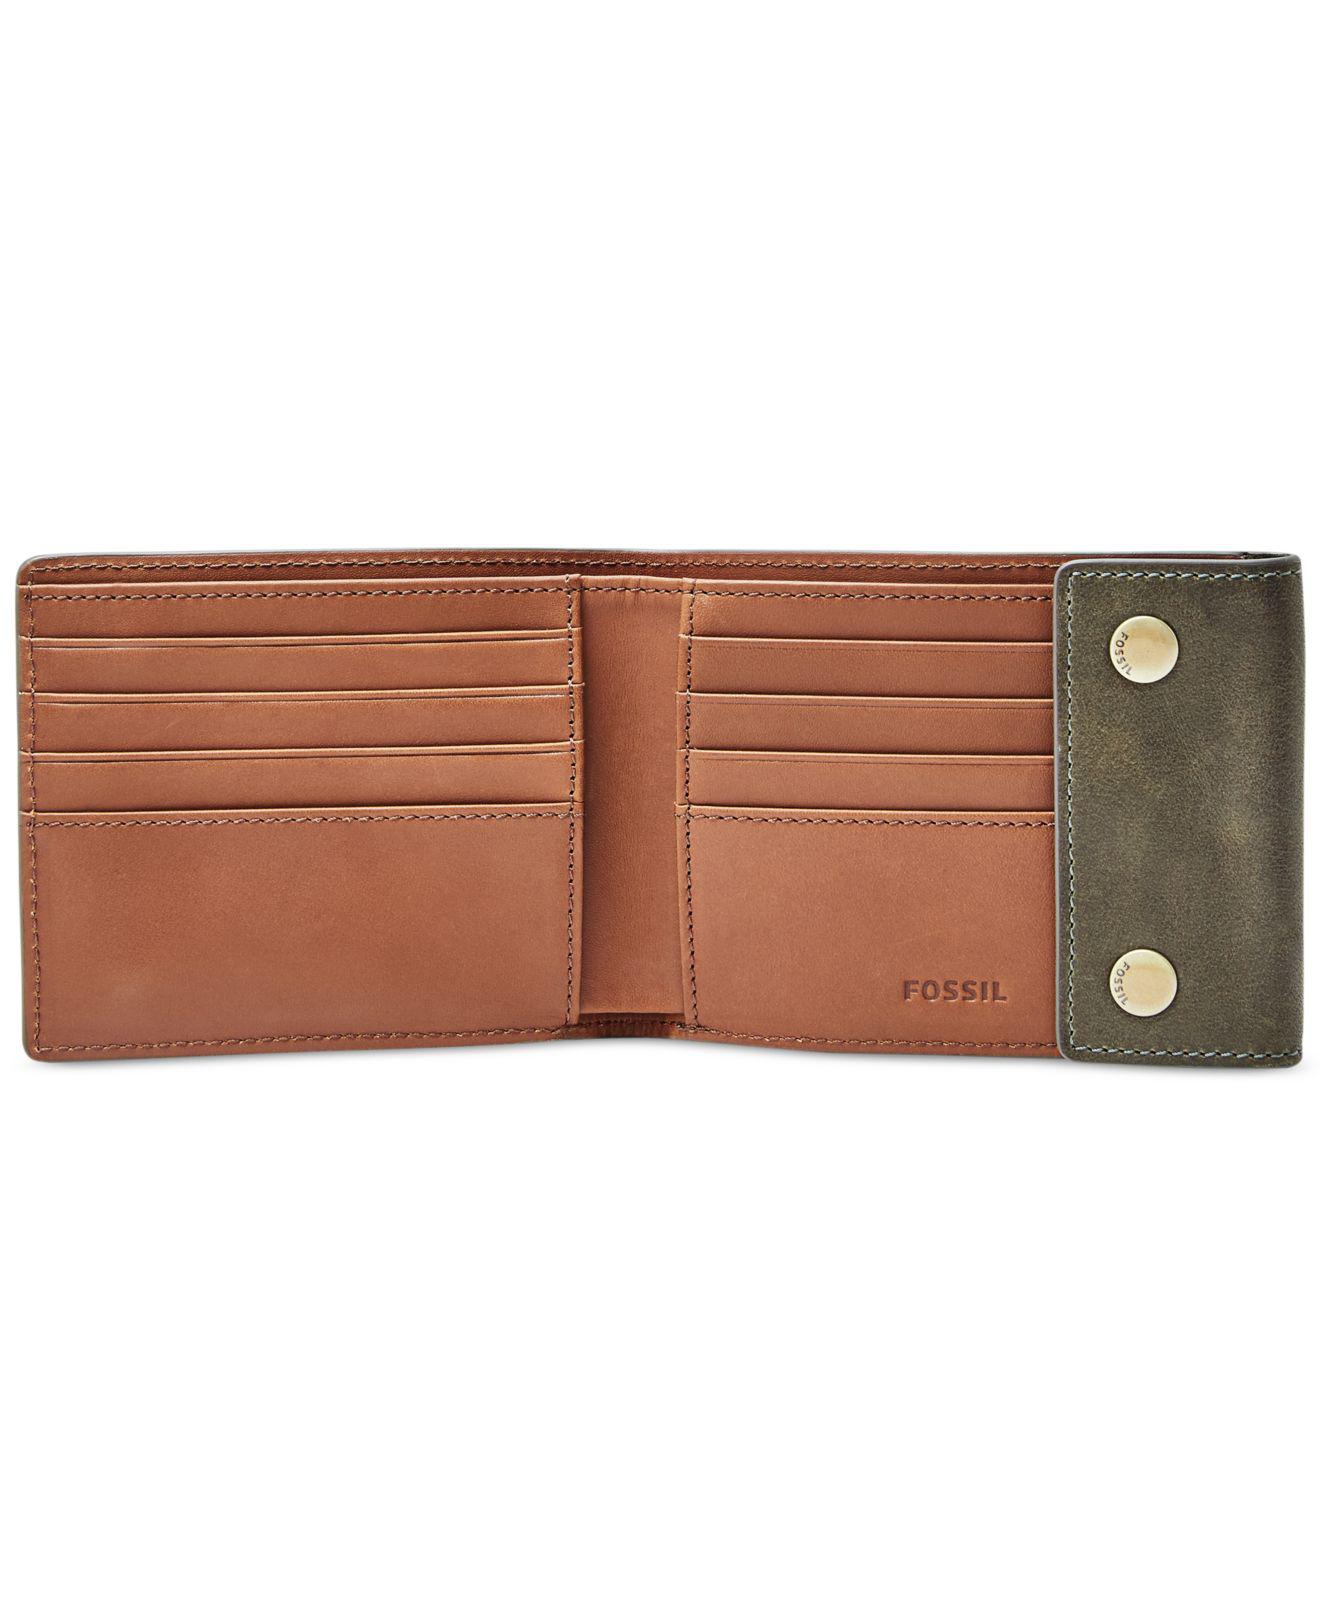 Fossil Men's Ethan Snap Leather Bifold Wallet in Green for Men